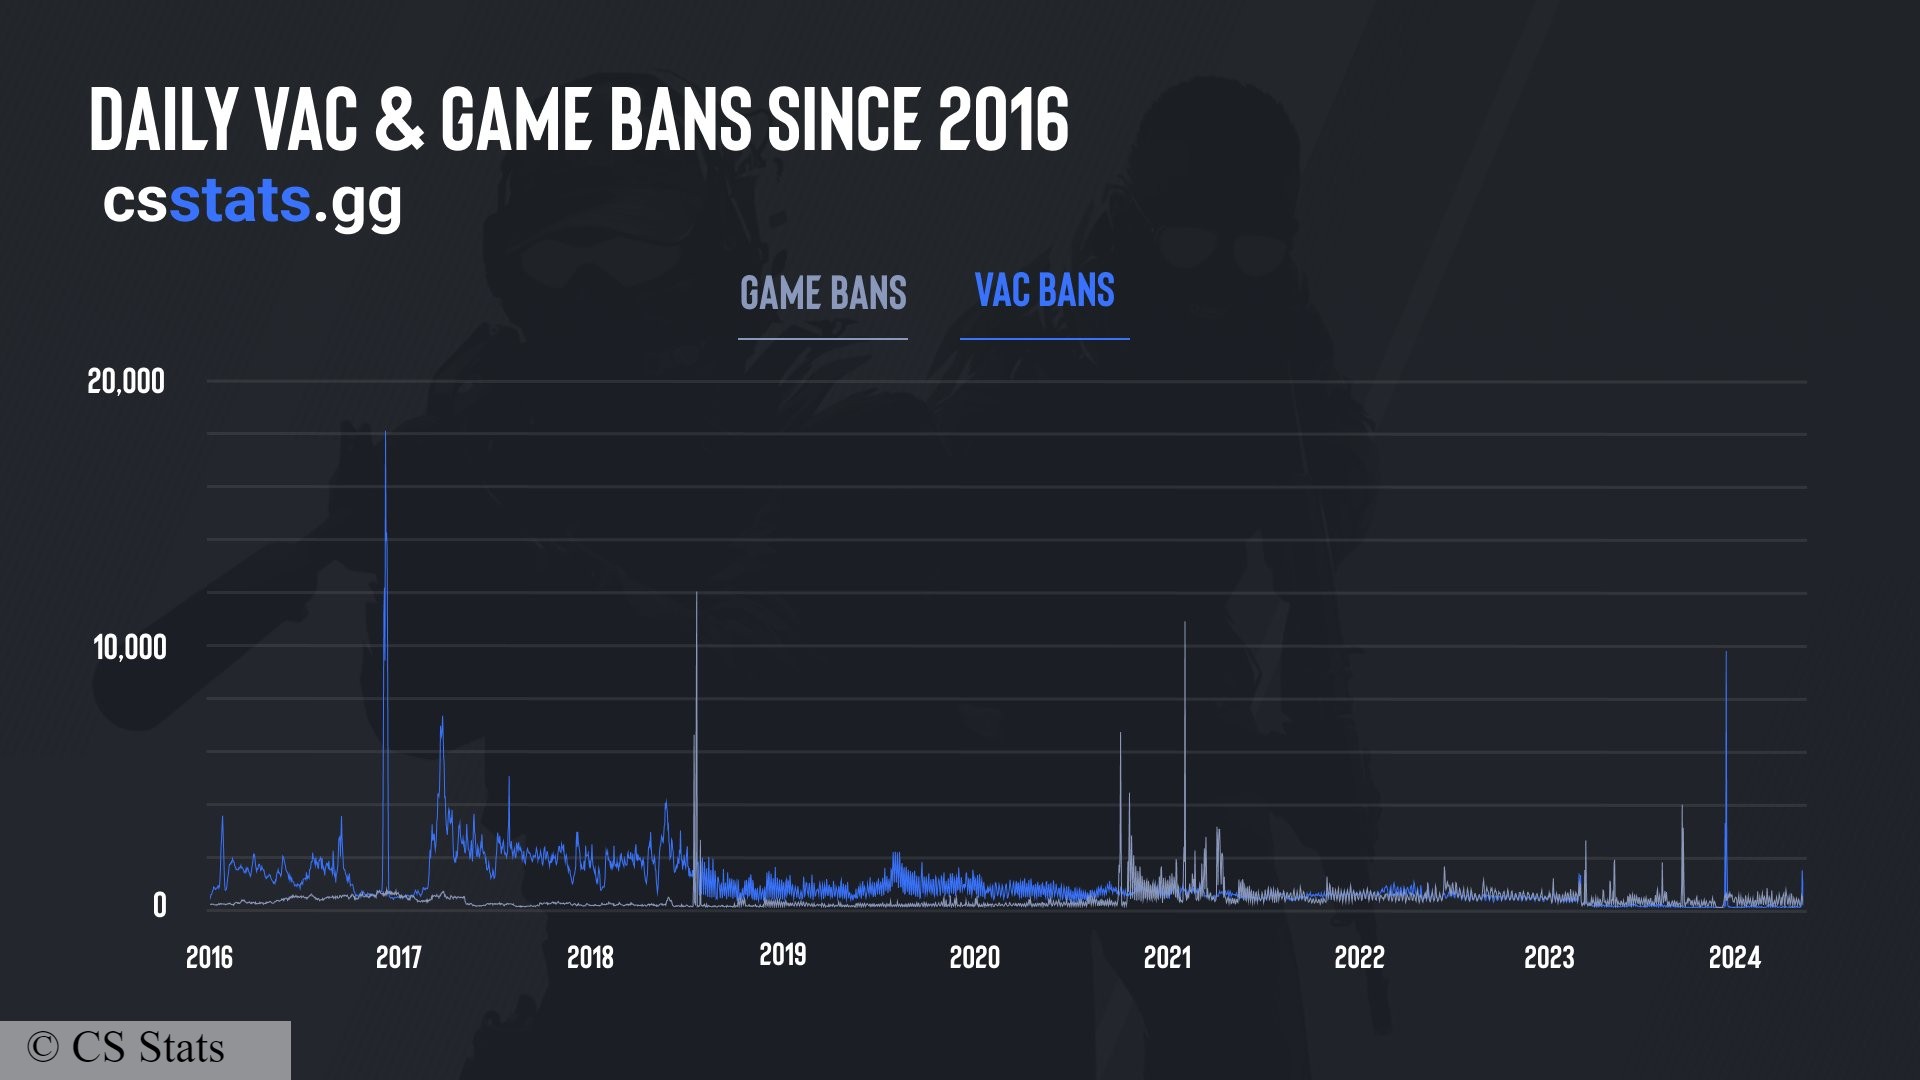 Counter-Strike 2 ban wave: A table showing banned accounts in Valve FPS game Counter-Strike 2